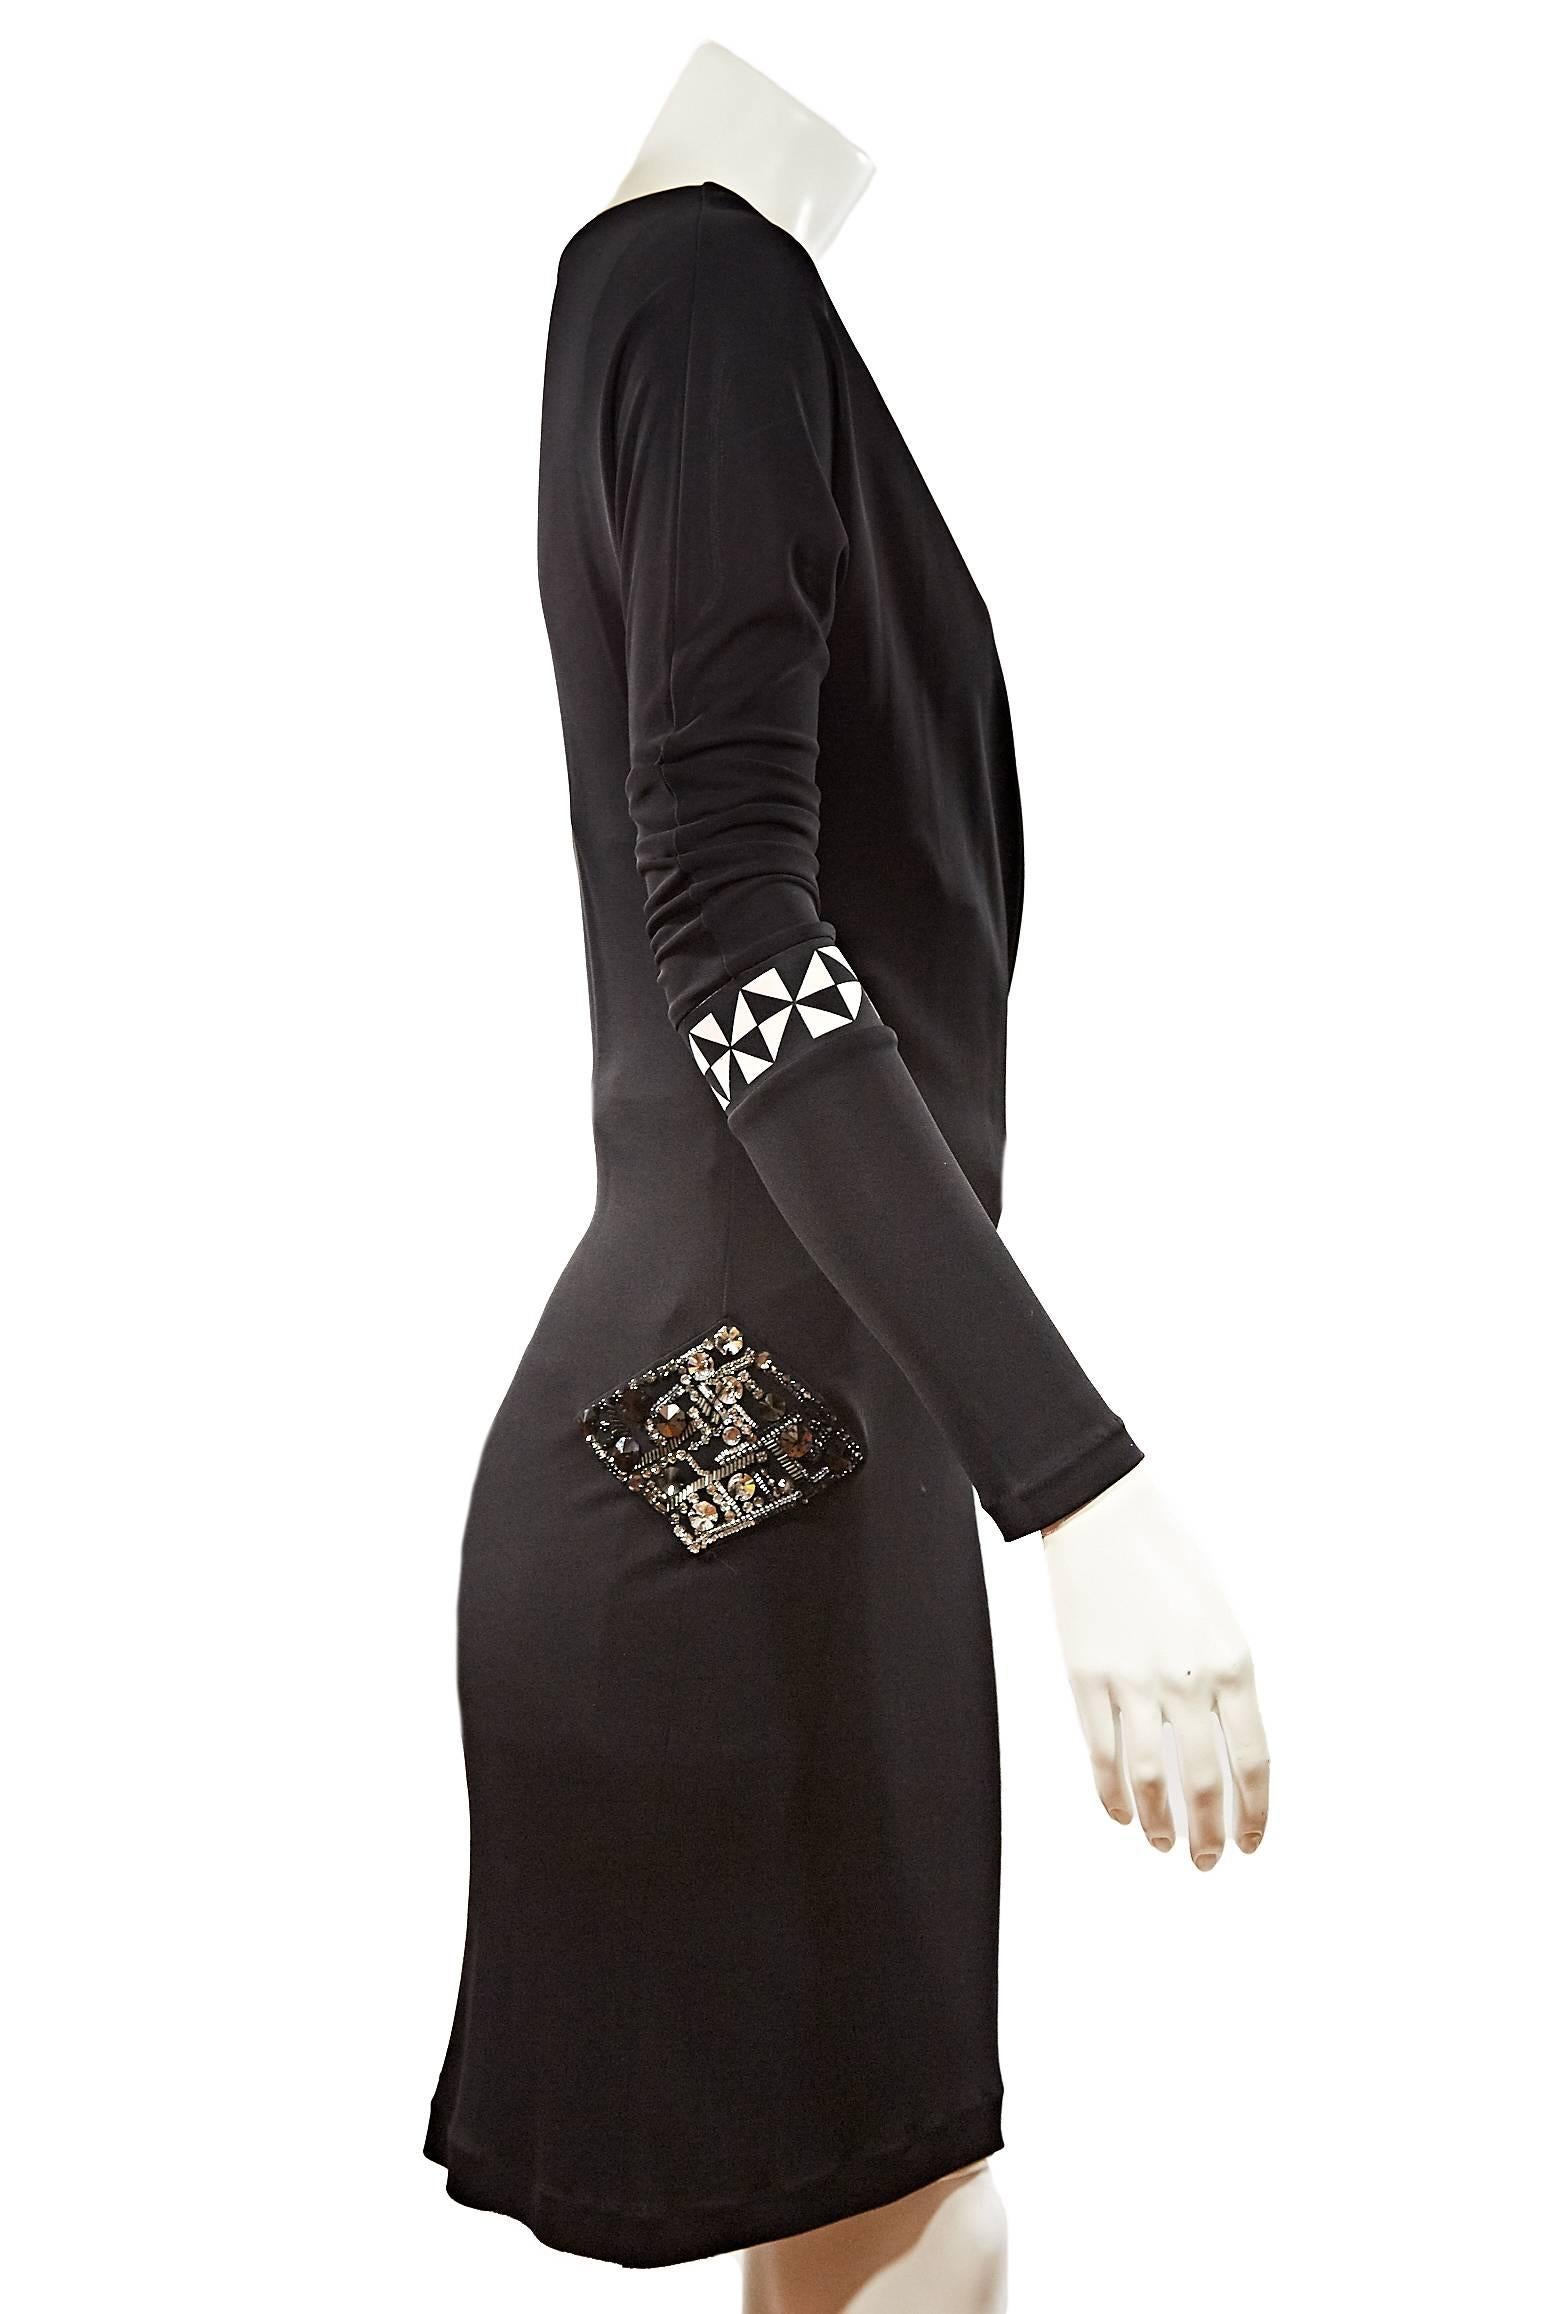 Emilio Pucci Black Viscose Dress w/ Rhinestone Applique. Long sleeve w/ draped necklace. White & black triangle design on sleeves. Above the knee.